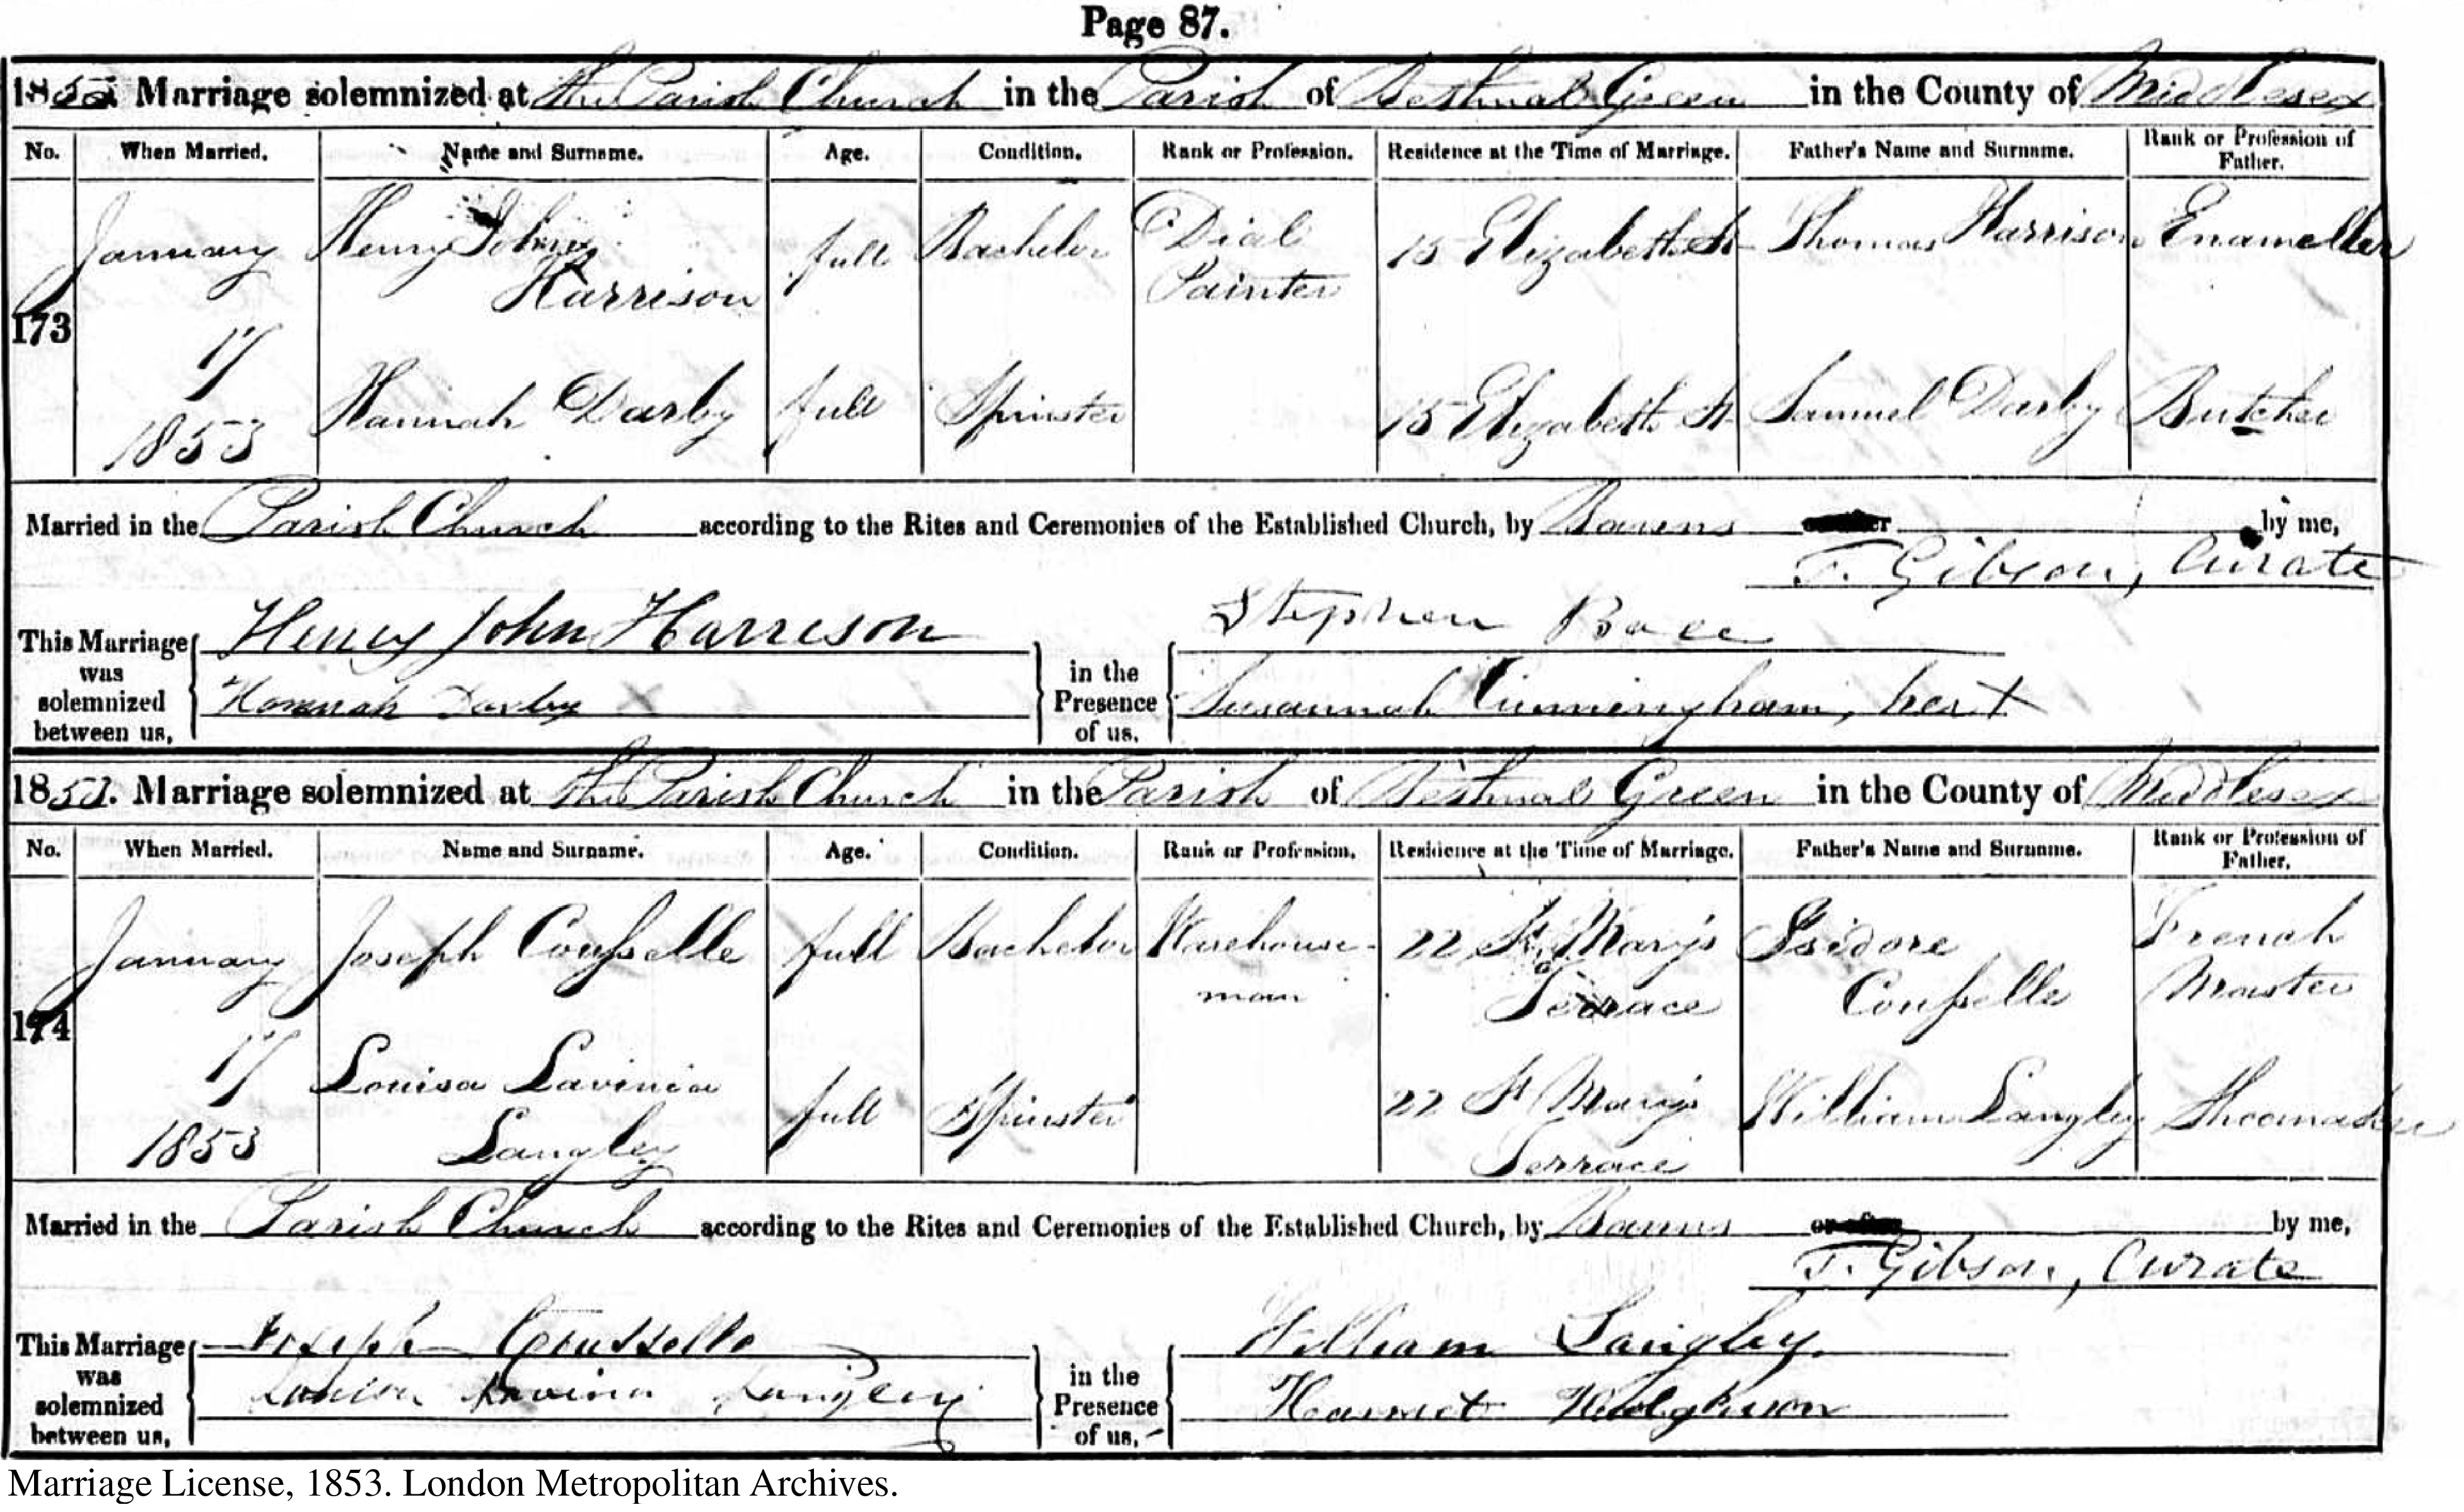 Joseph Cousselle and Louisa Langley, Marriage License, 1853